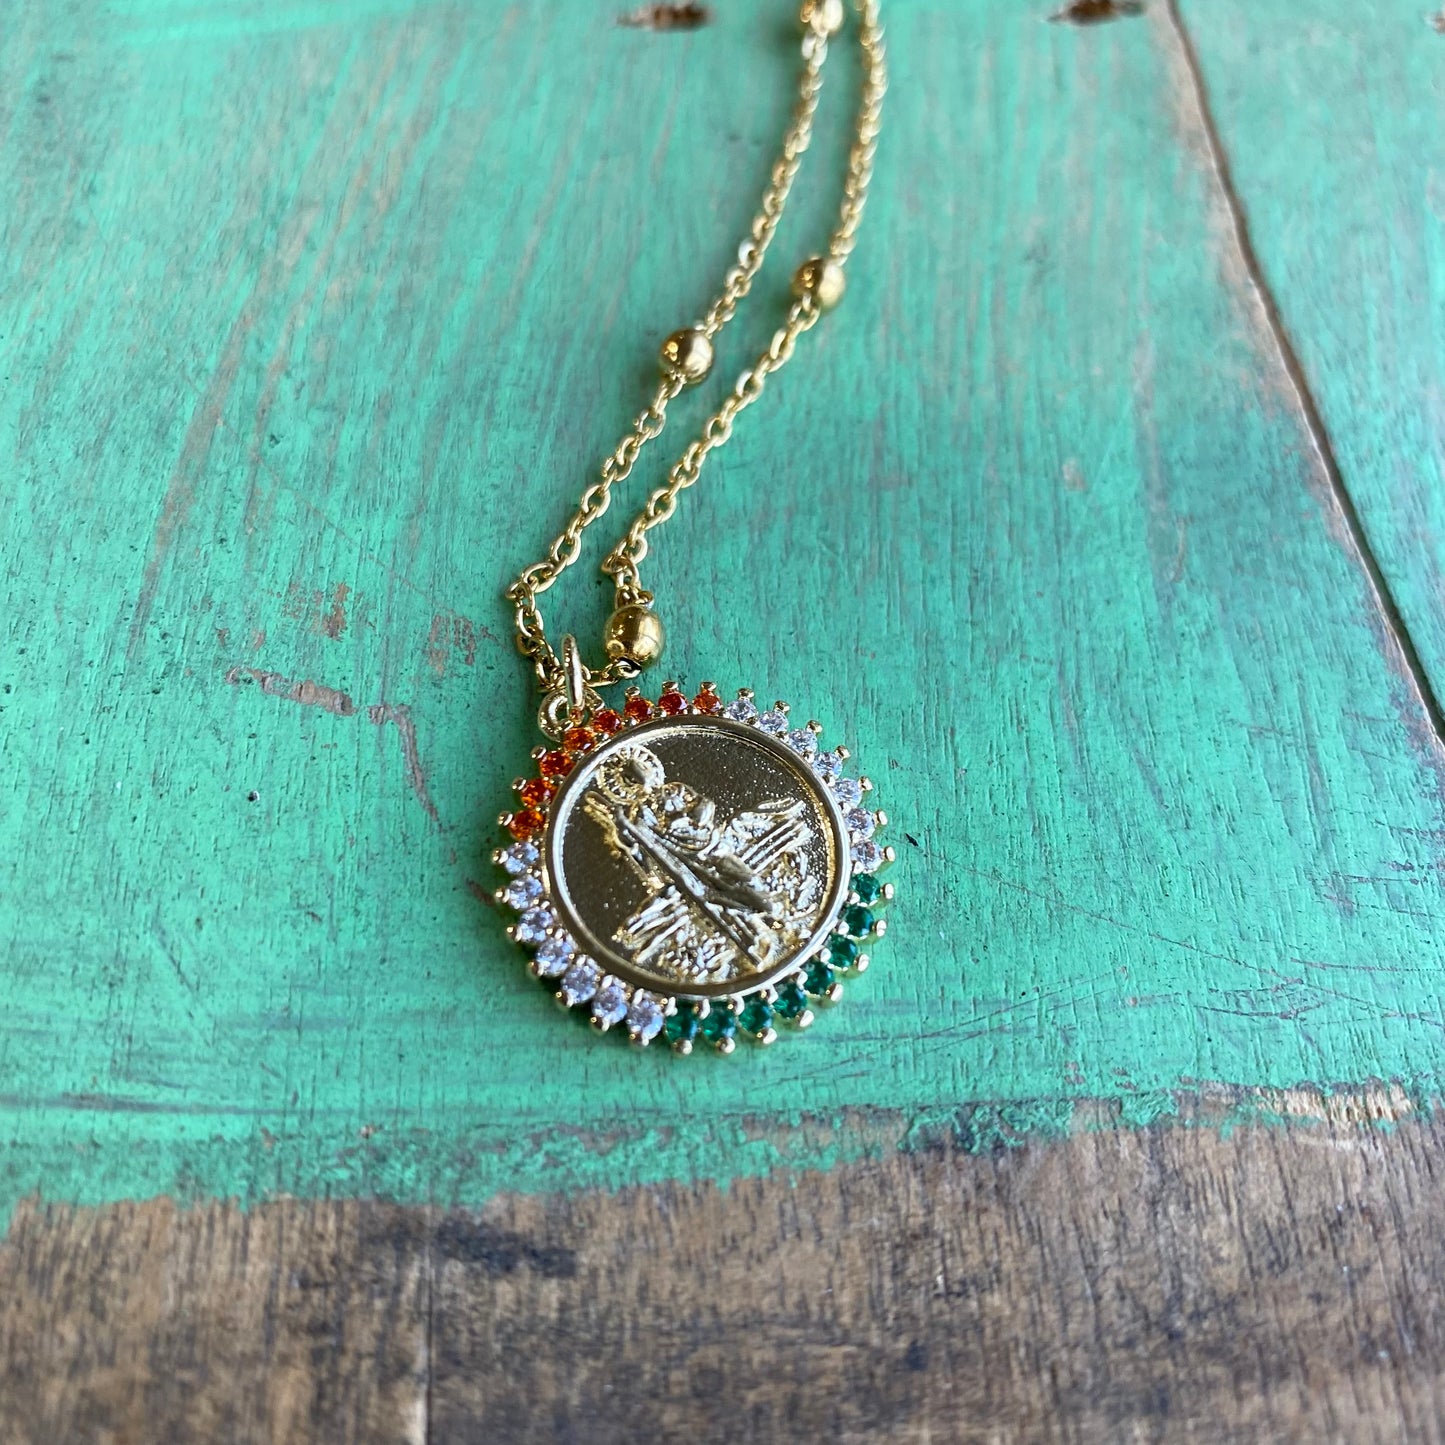 St Jude Necklace